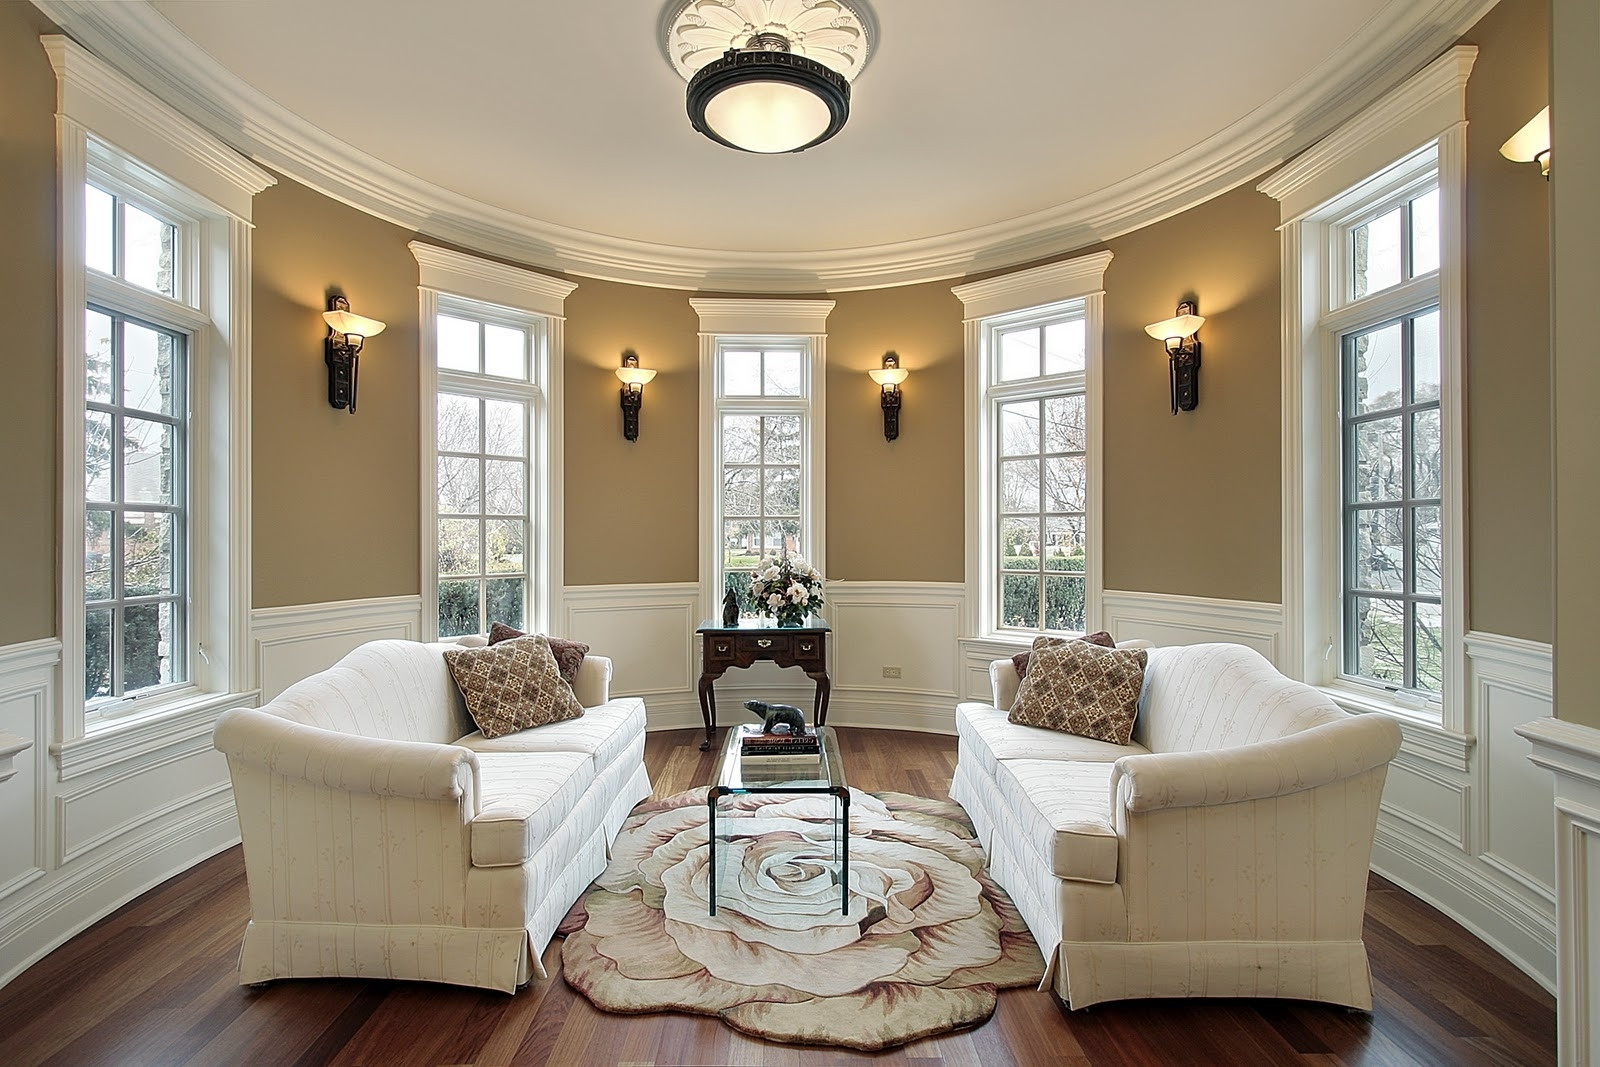 Ceiling Lights Living Room
 5 Top Tips For The Best Light Fixtures